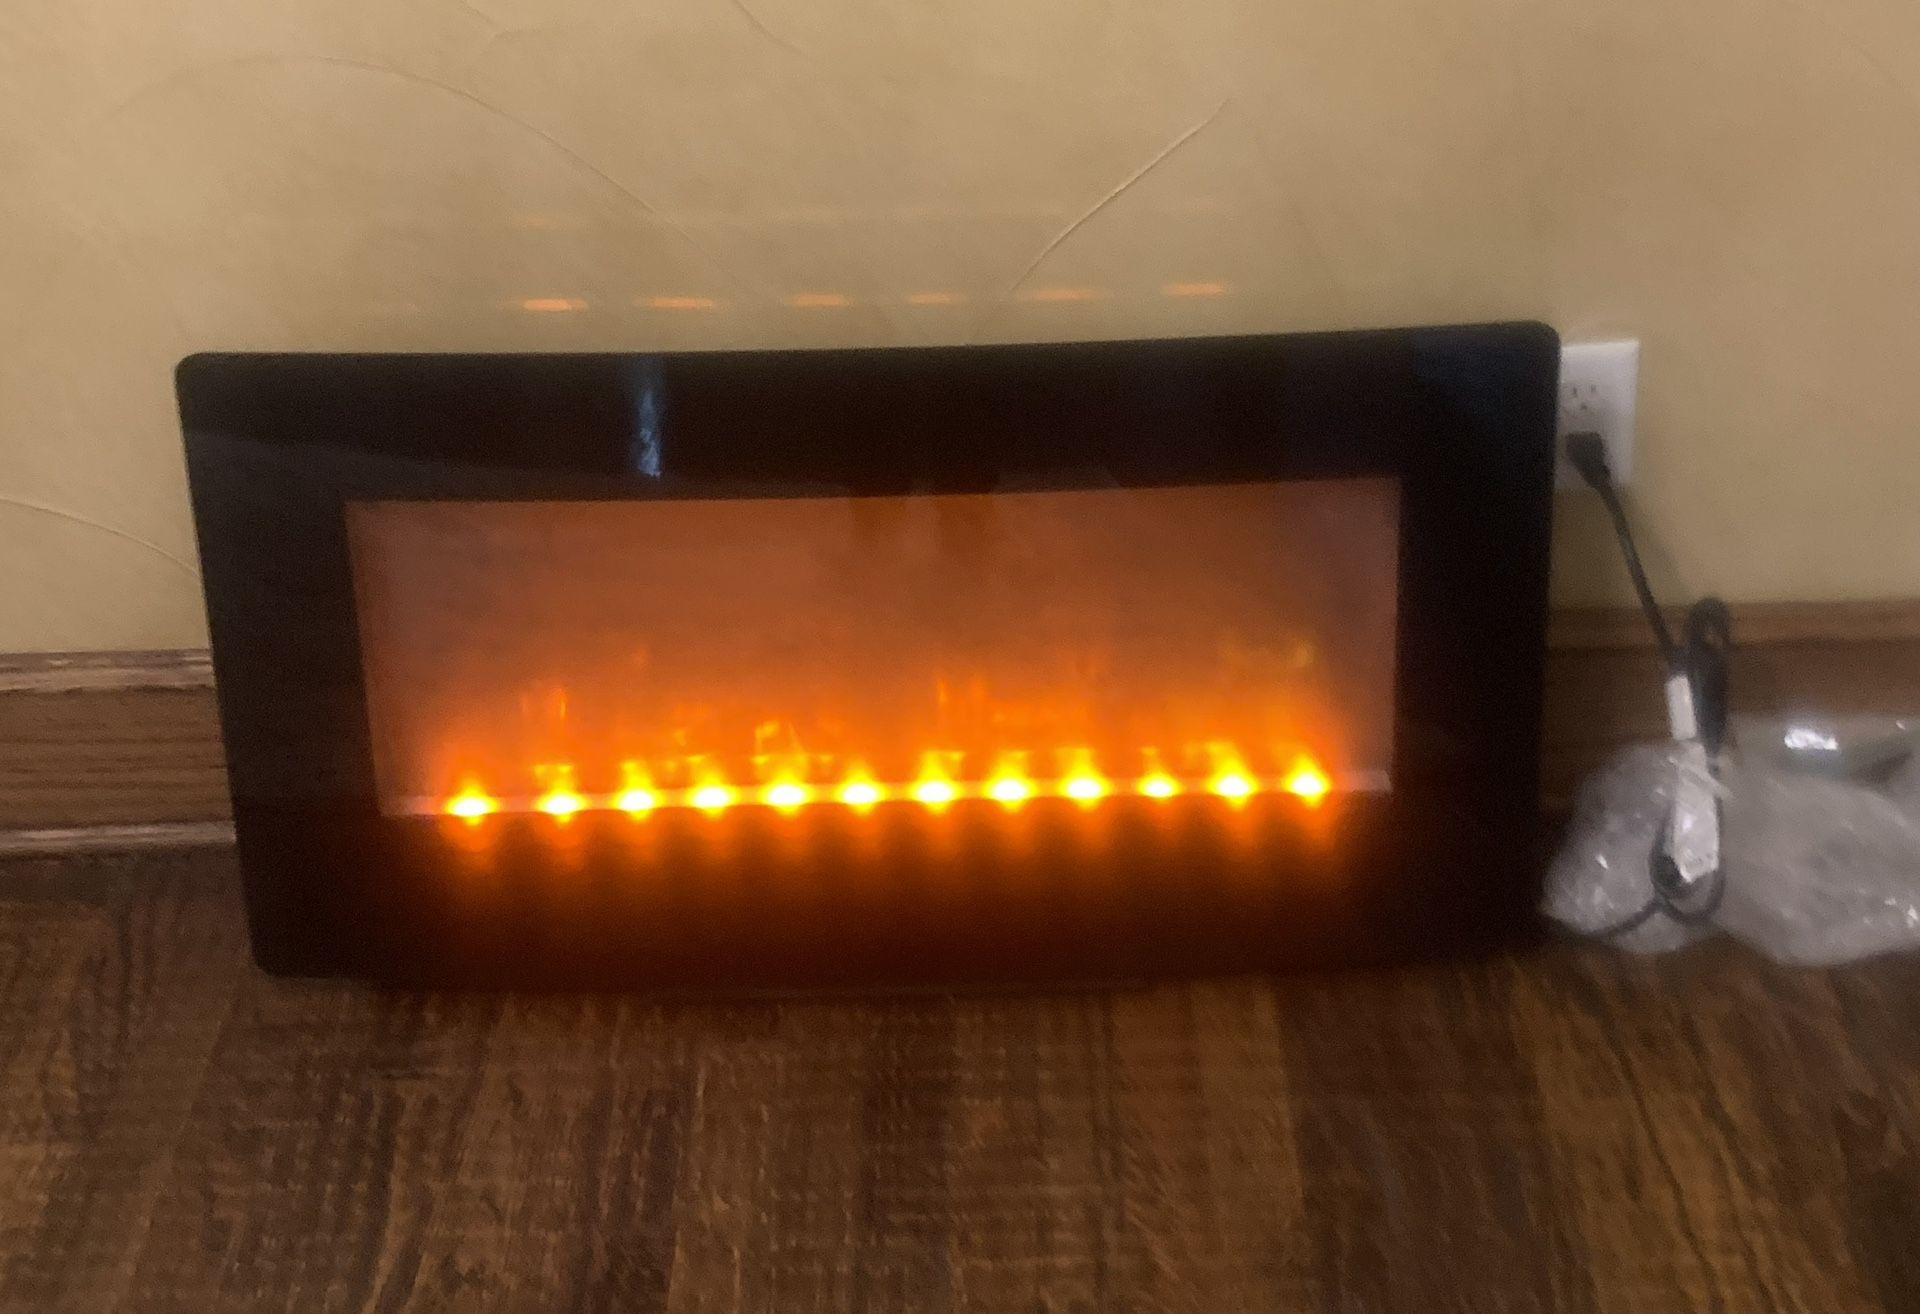 Electric Fireplace. 